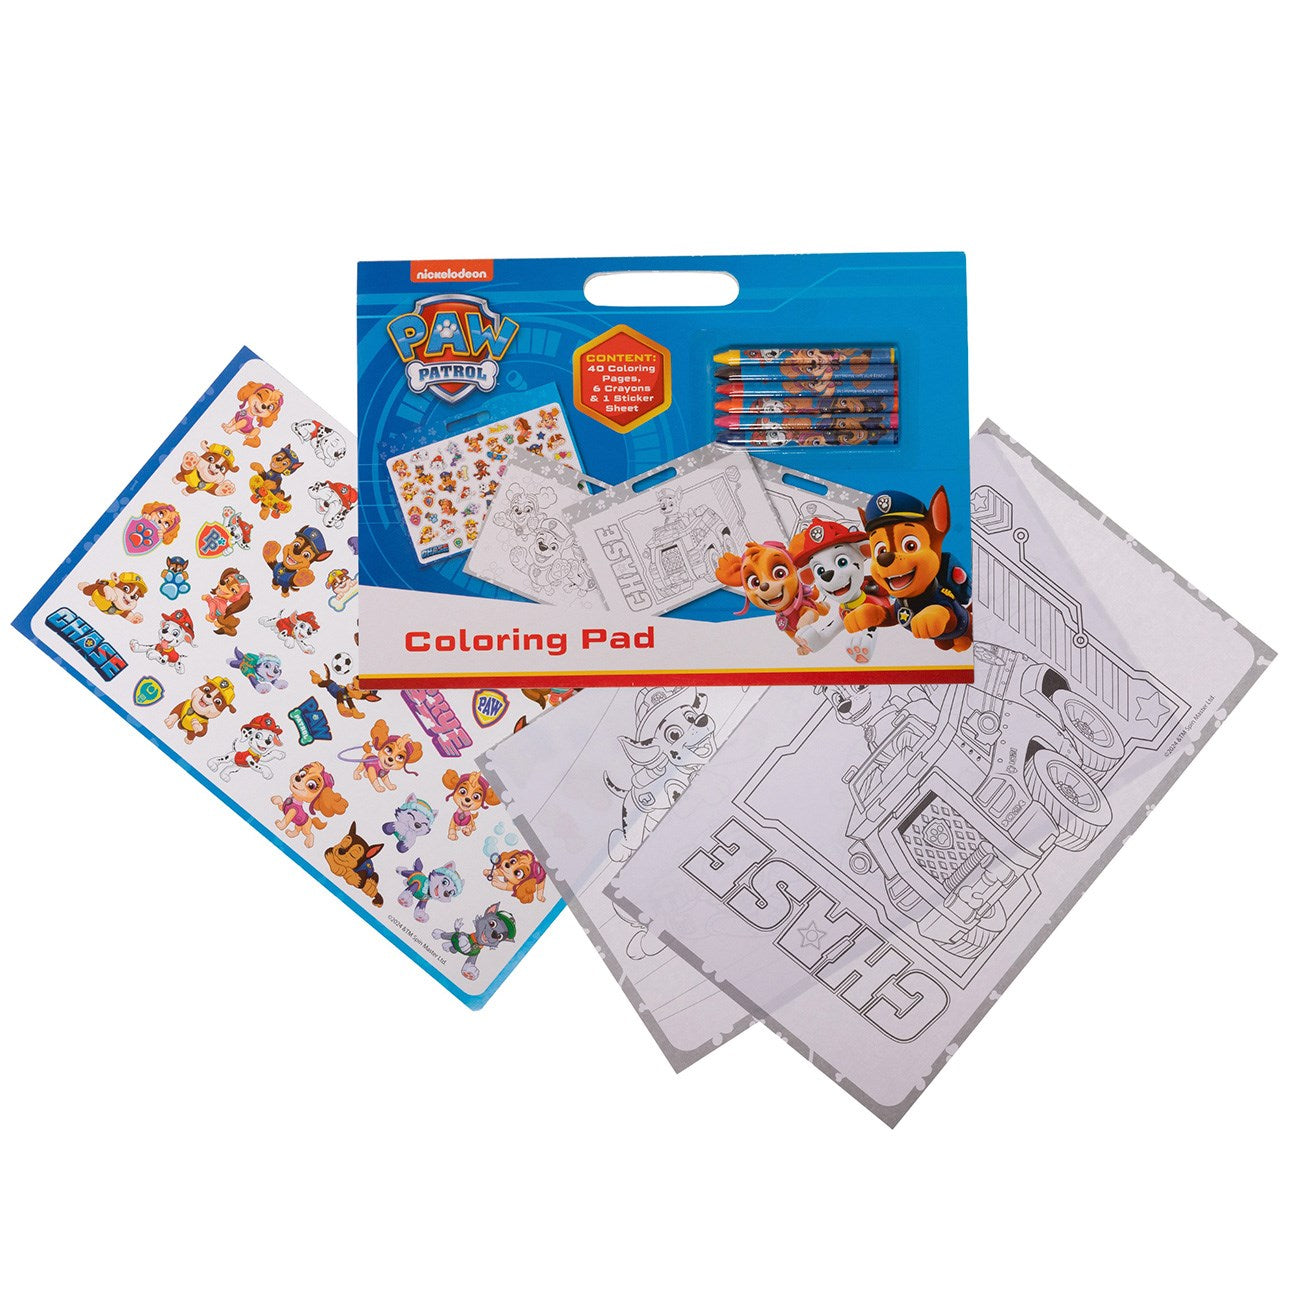 Euromic Paw Patrol Artist Book with 40 Pages